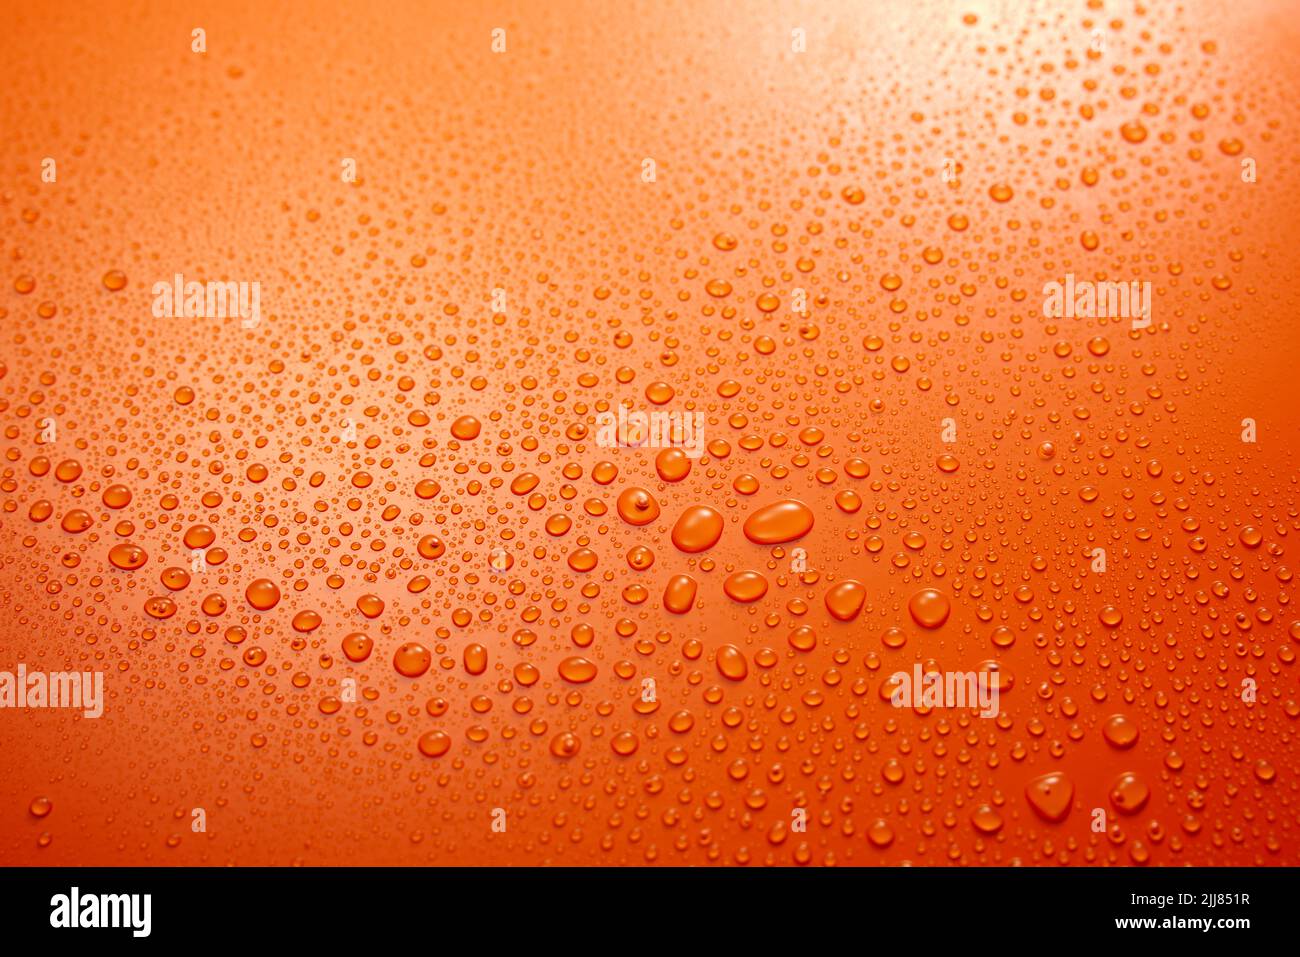 Full frame of wet clear orange background with condense and clear small round water drops flowing down in light room Stock Photo